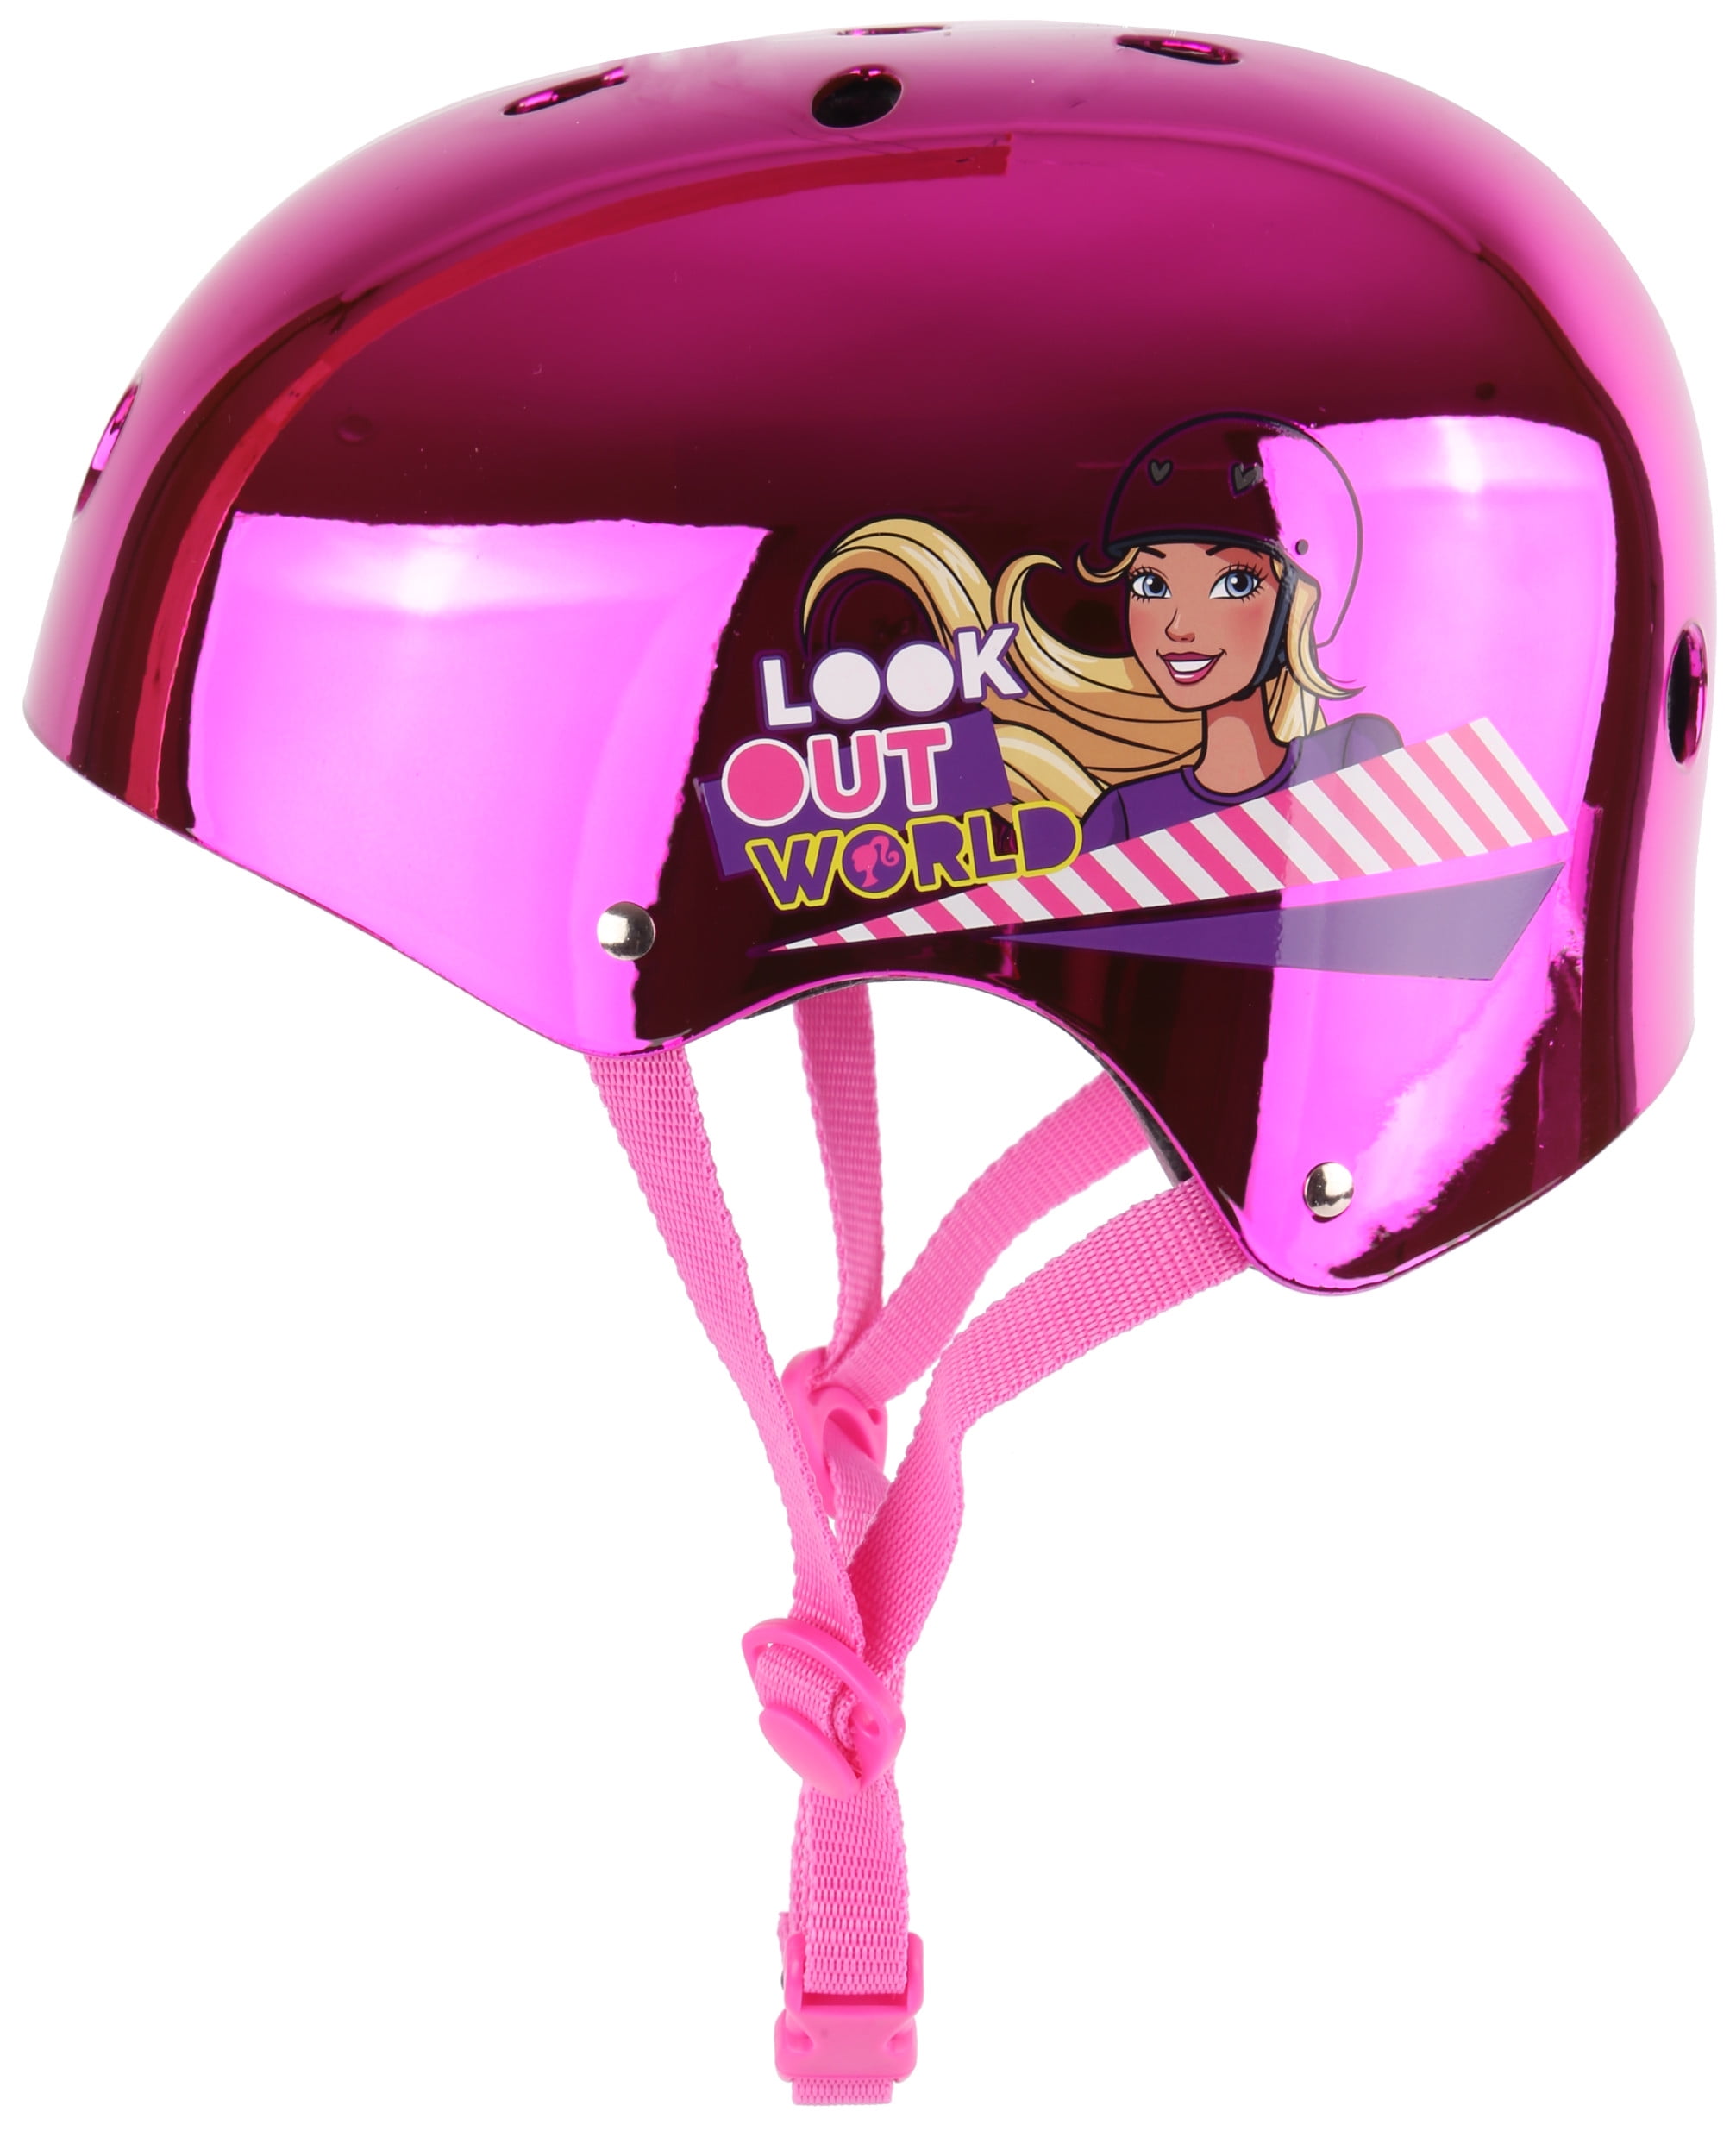 MY FAB BEAUTY GIRLS SET SIZE 46-52cm BARBIE CYCLE/SCOOTER SAFETY HELMET 